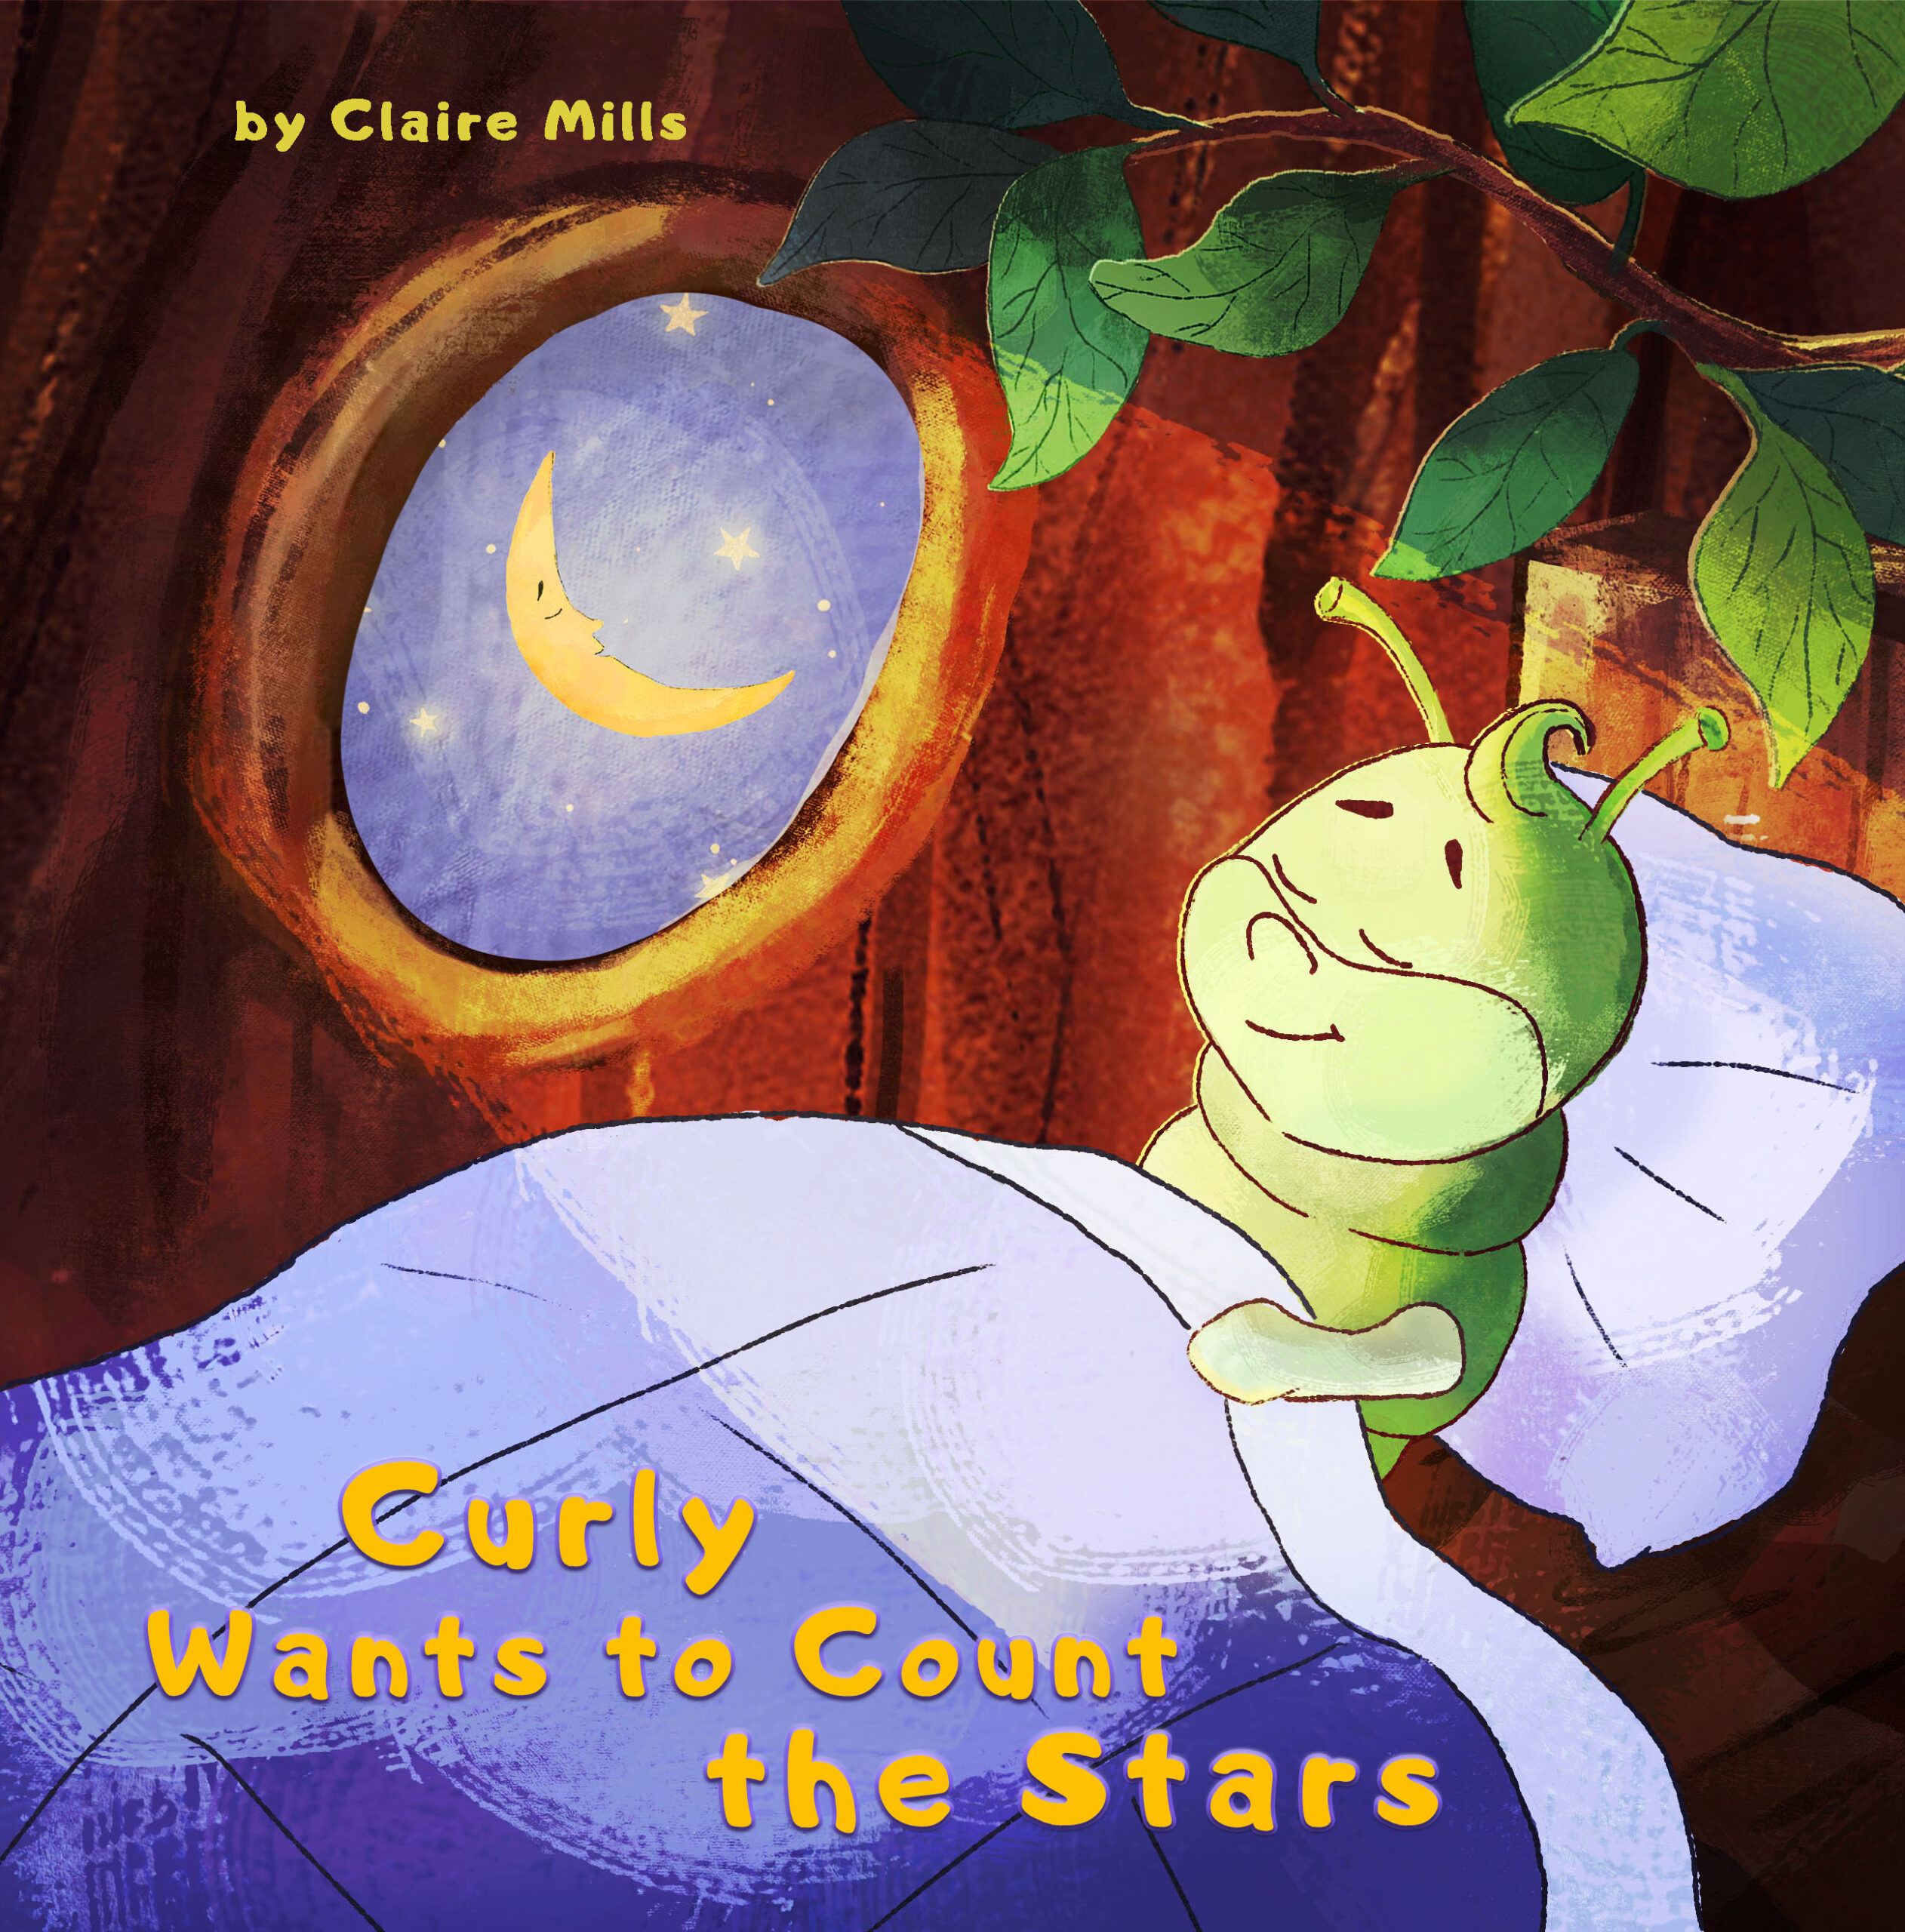 FREE: Curly Wants to Count the Stars by Claire Mills